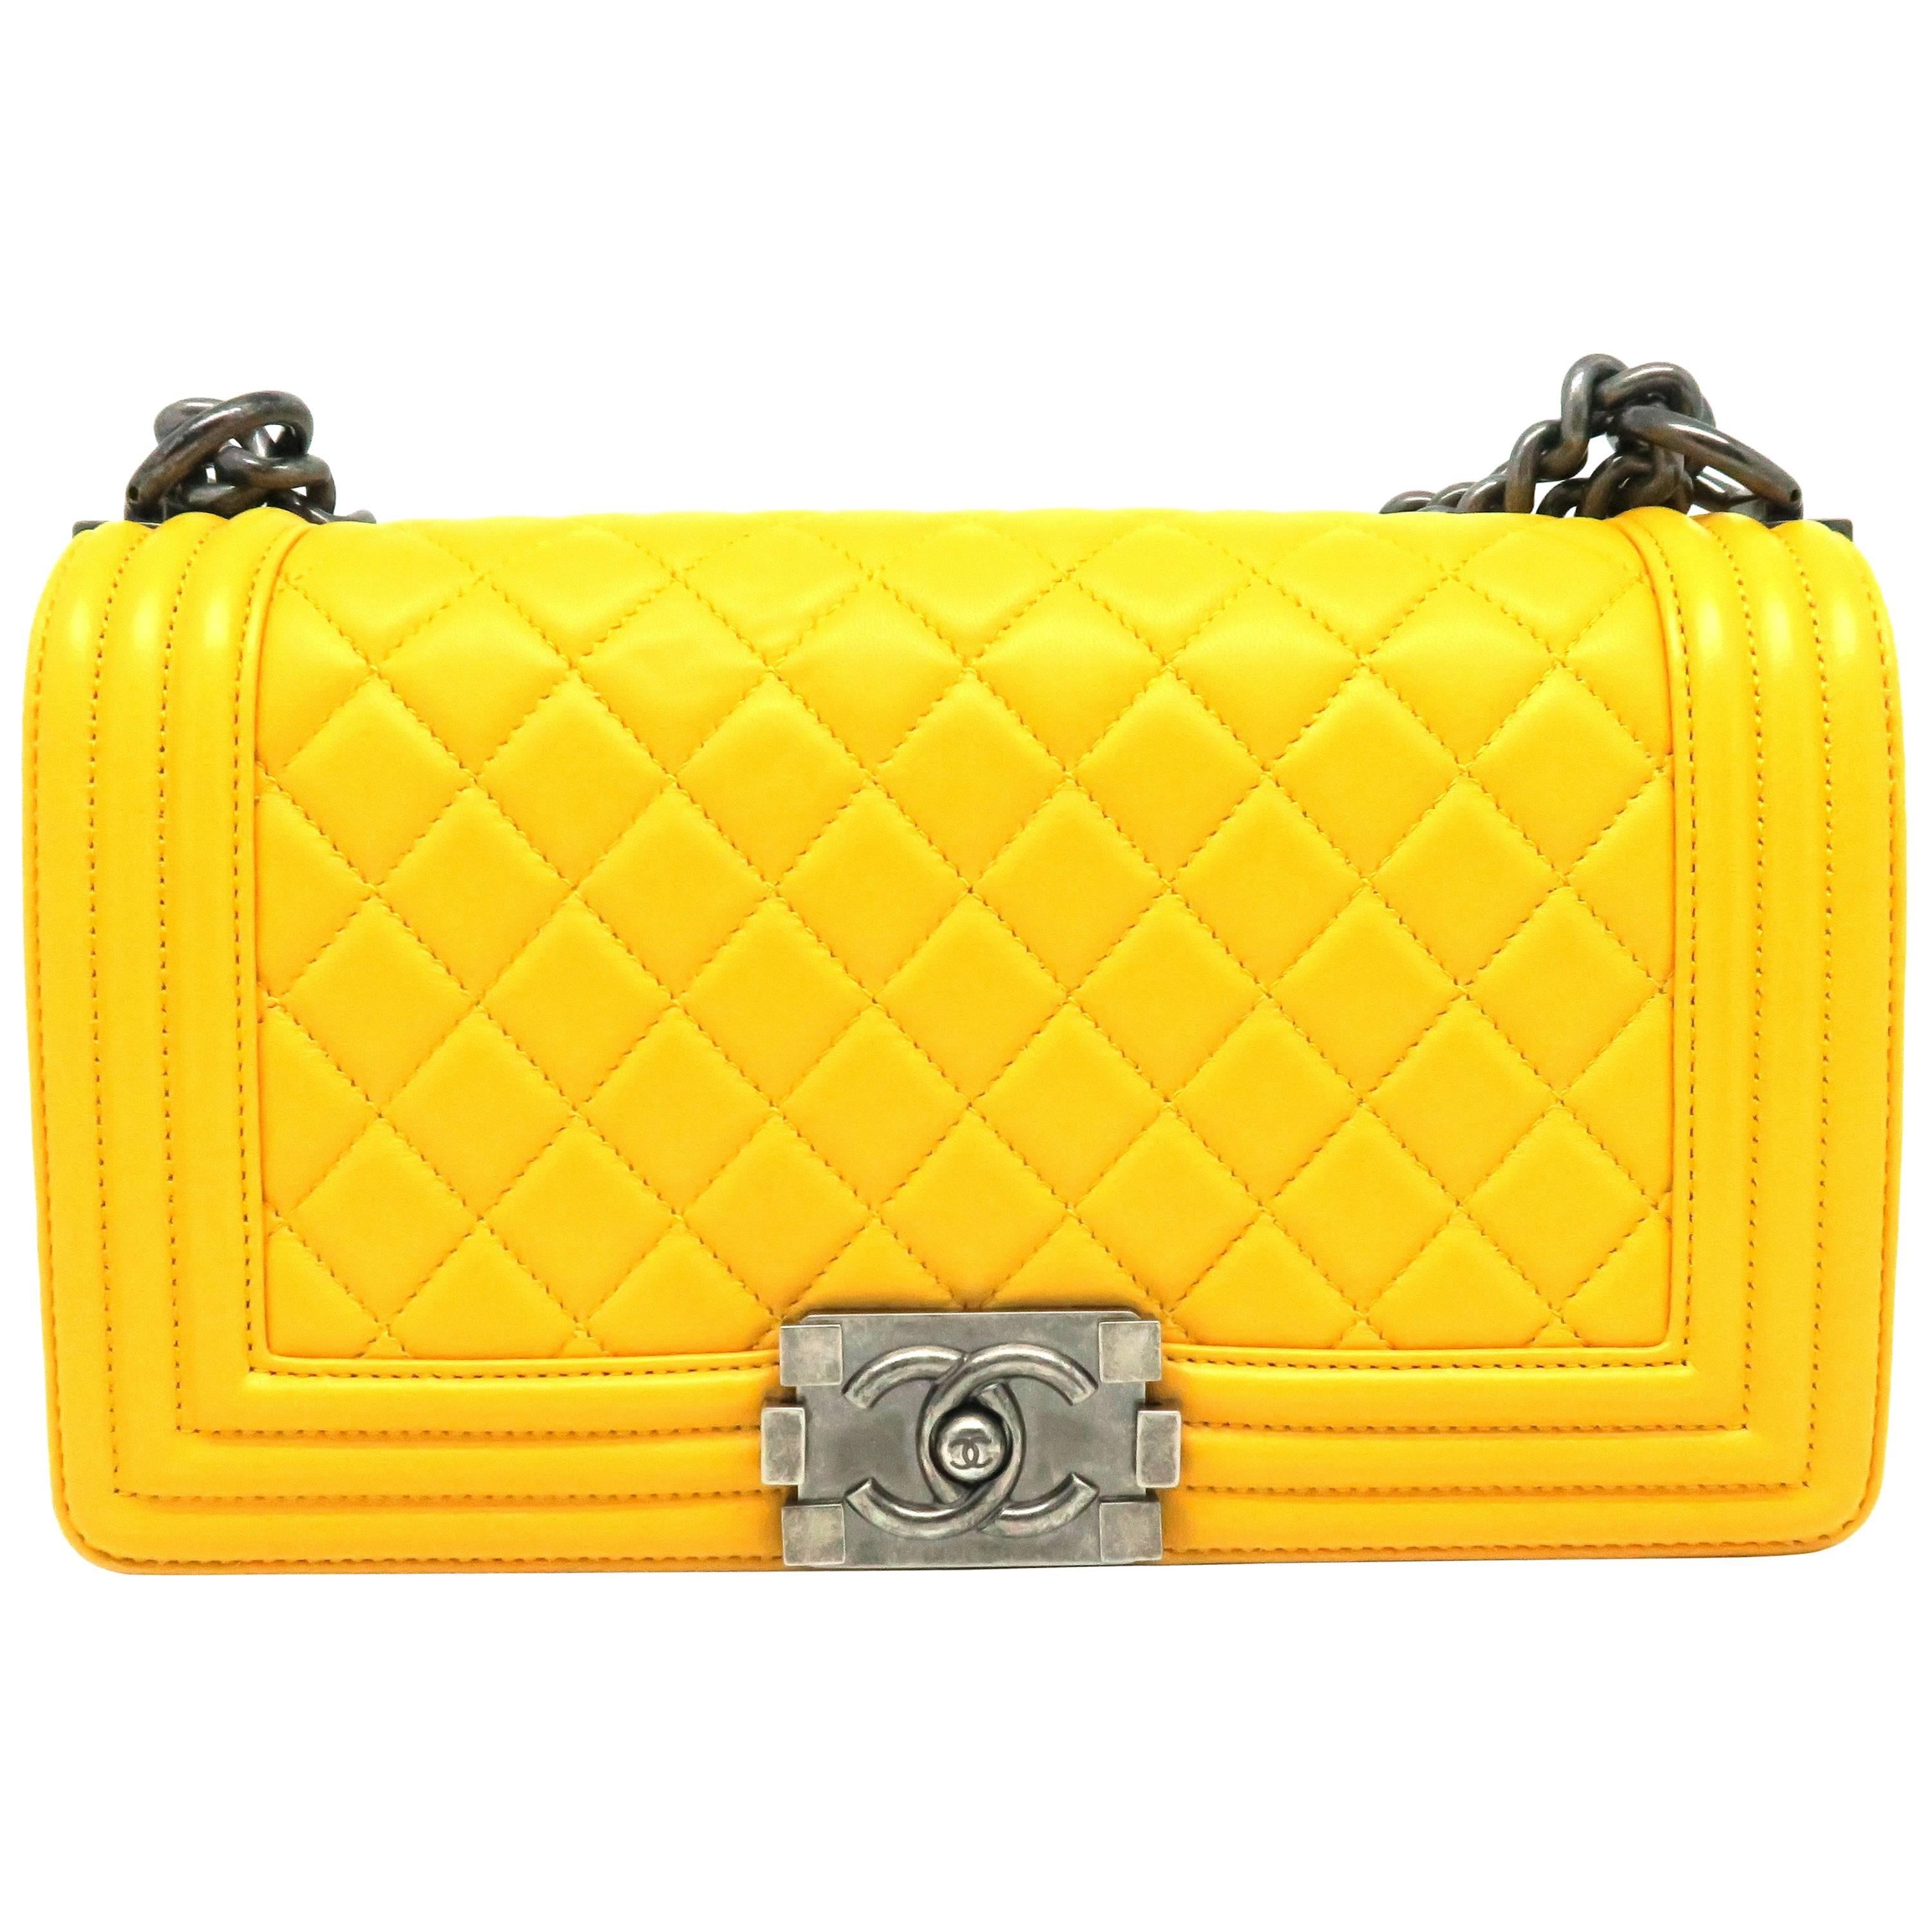 Chanel Boy Flap Yellow Quilted Calfskin Leather Silver Metal Chain Shoulder Bag